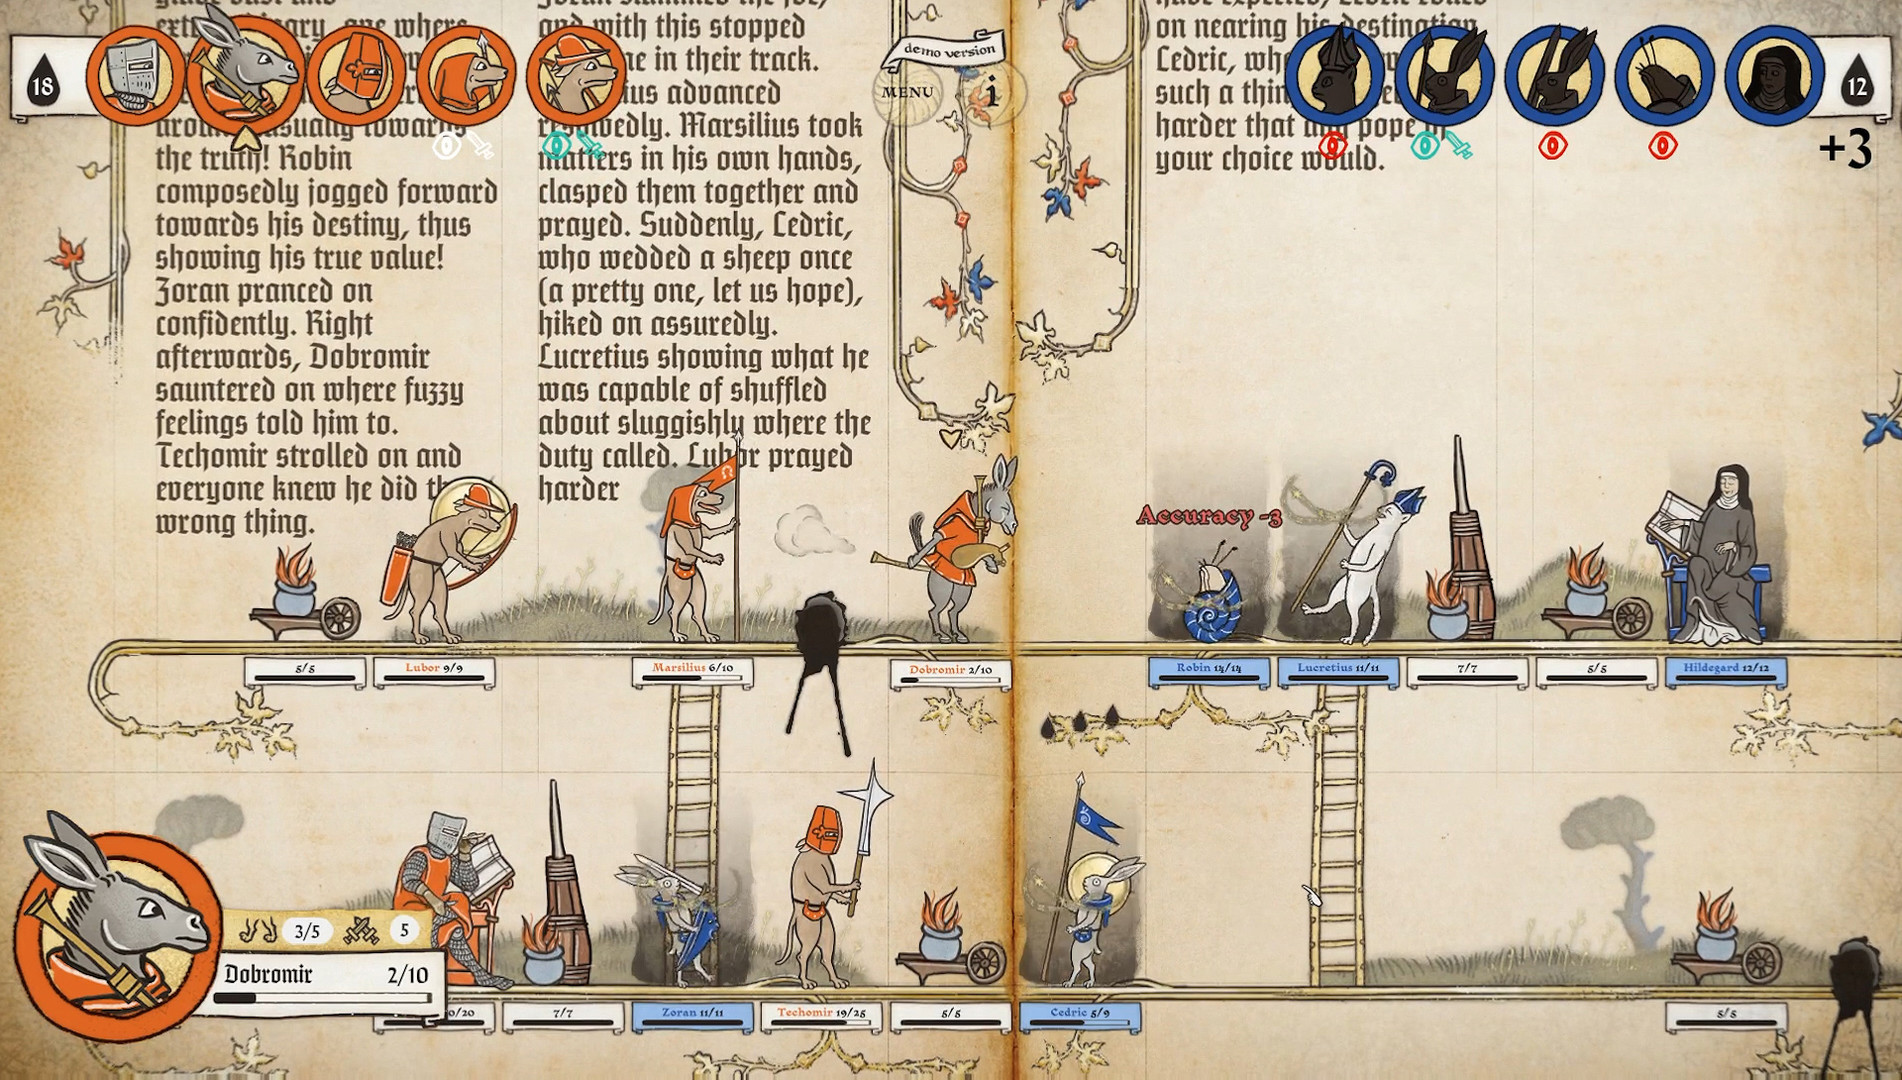 Image of medieval marginalia creatures battling in game Inkulinati. They are illustrated in a style like an illuminated manuscript.